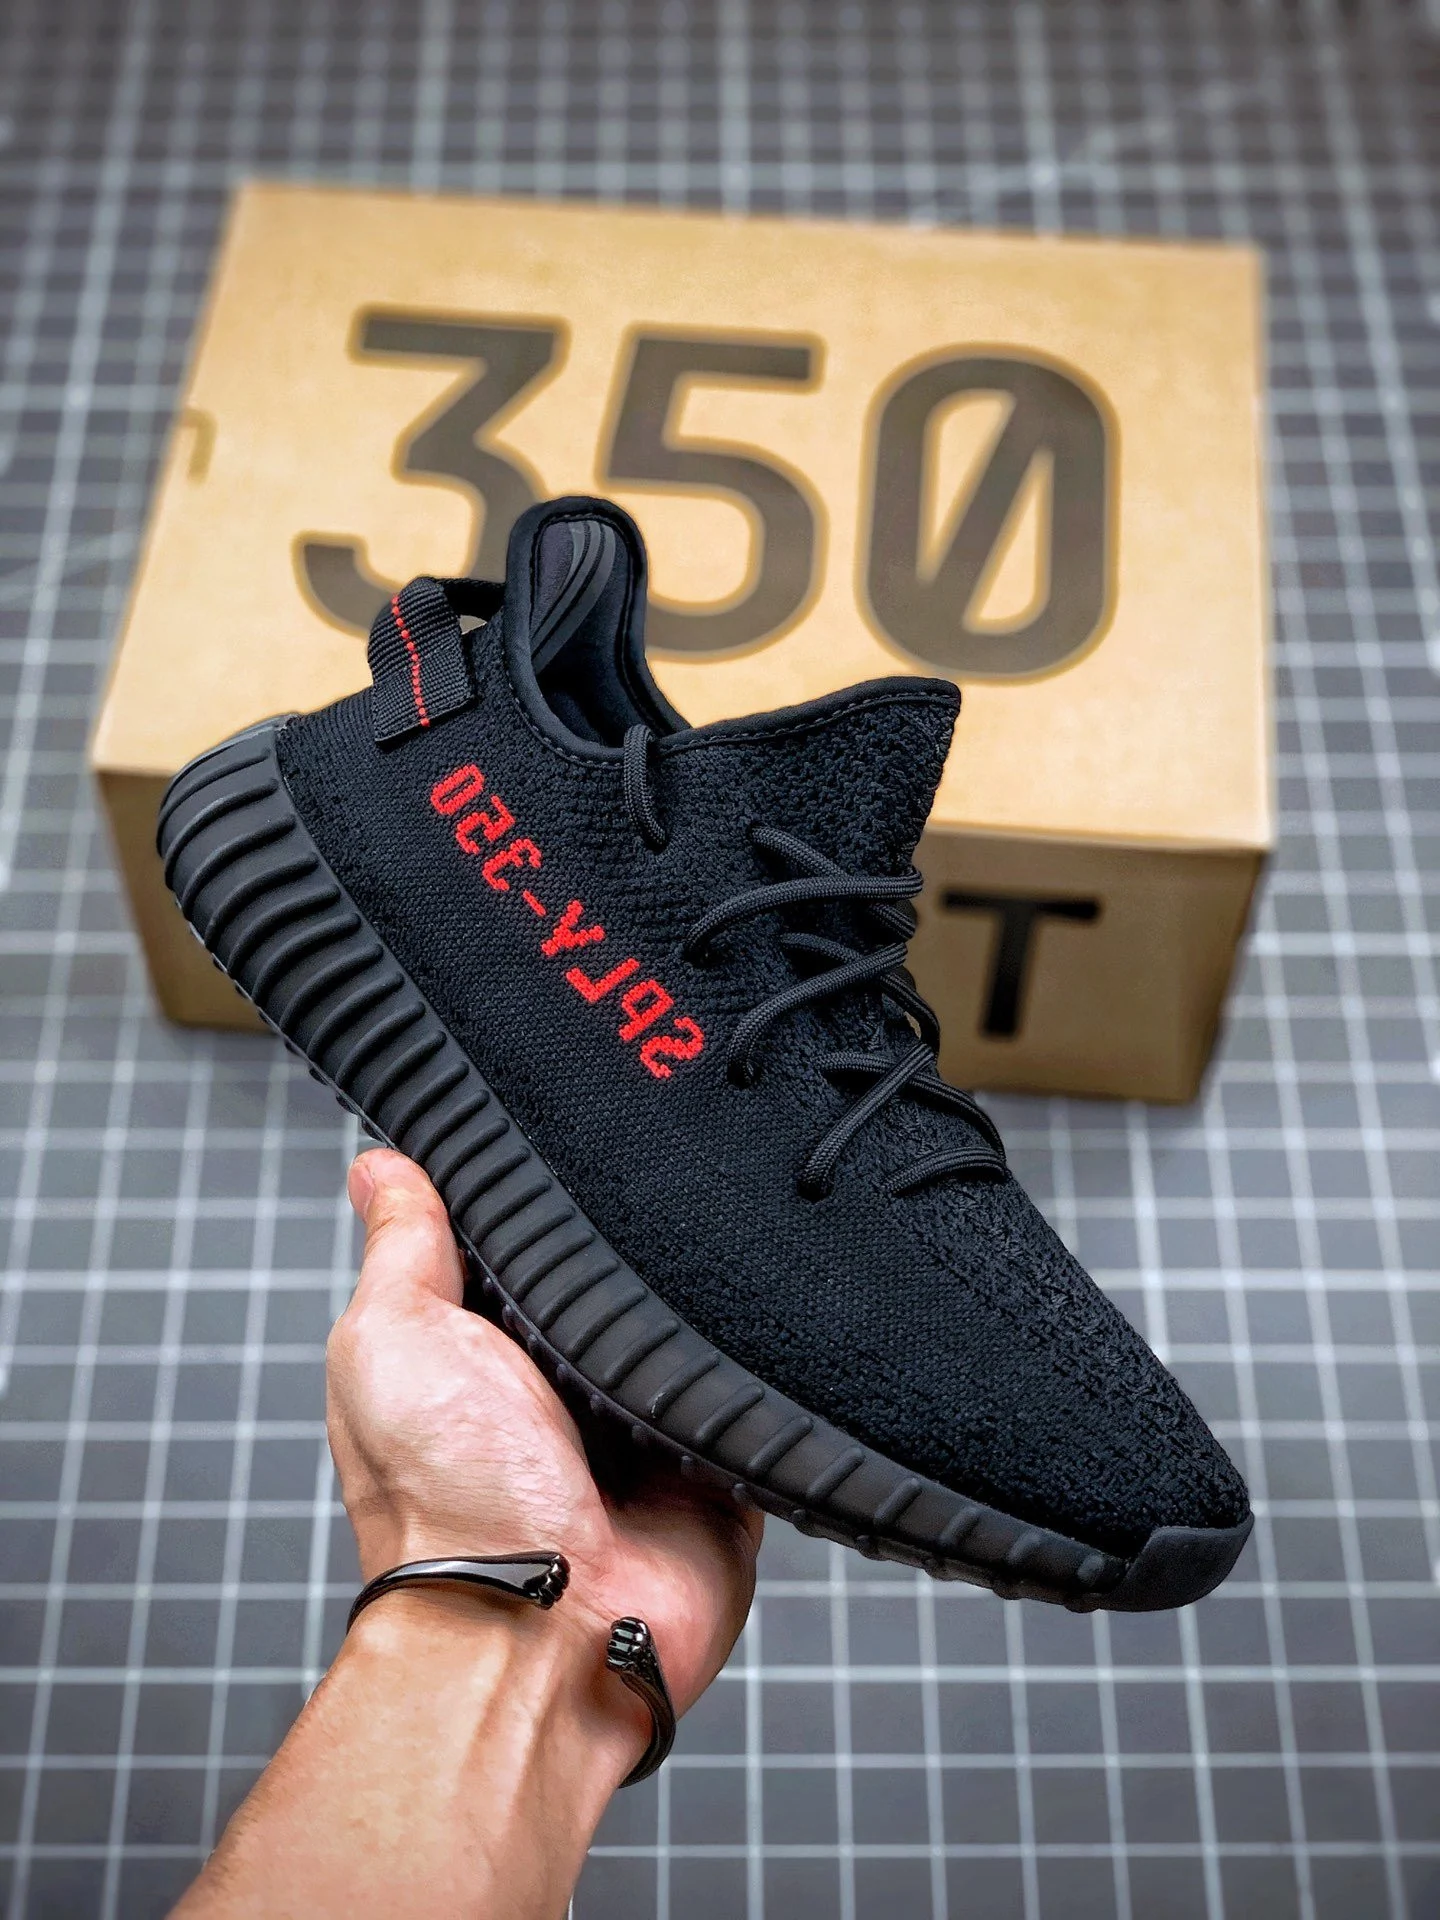 Adidas Yeezy Boost 350 V2 Bred CP9652 For Sale